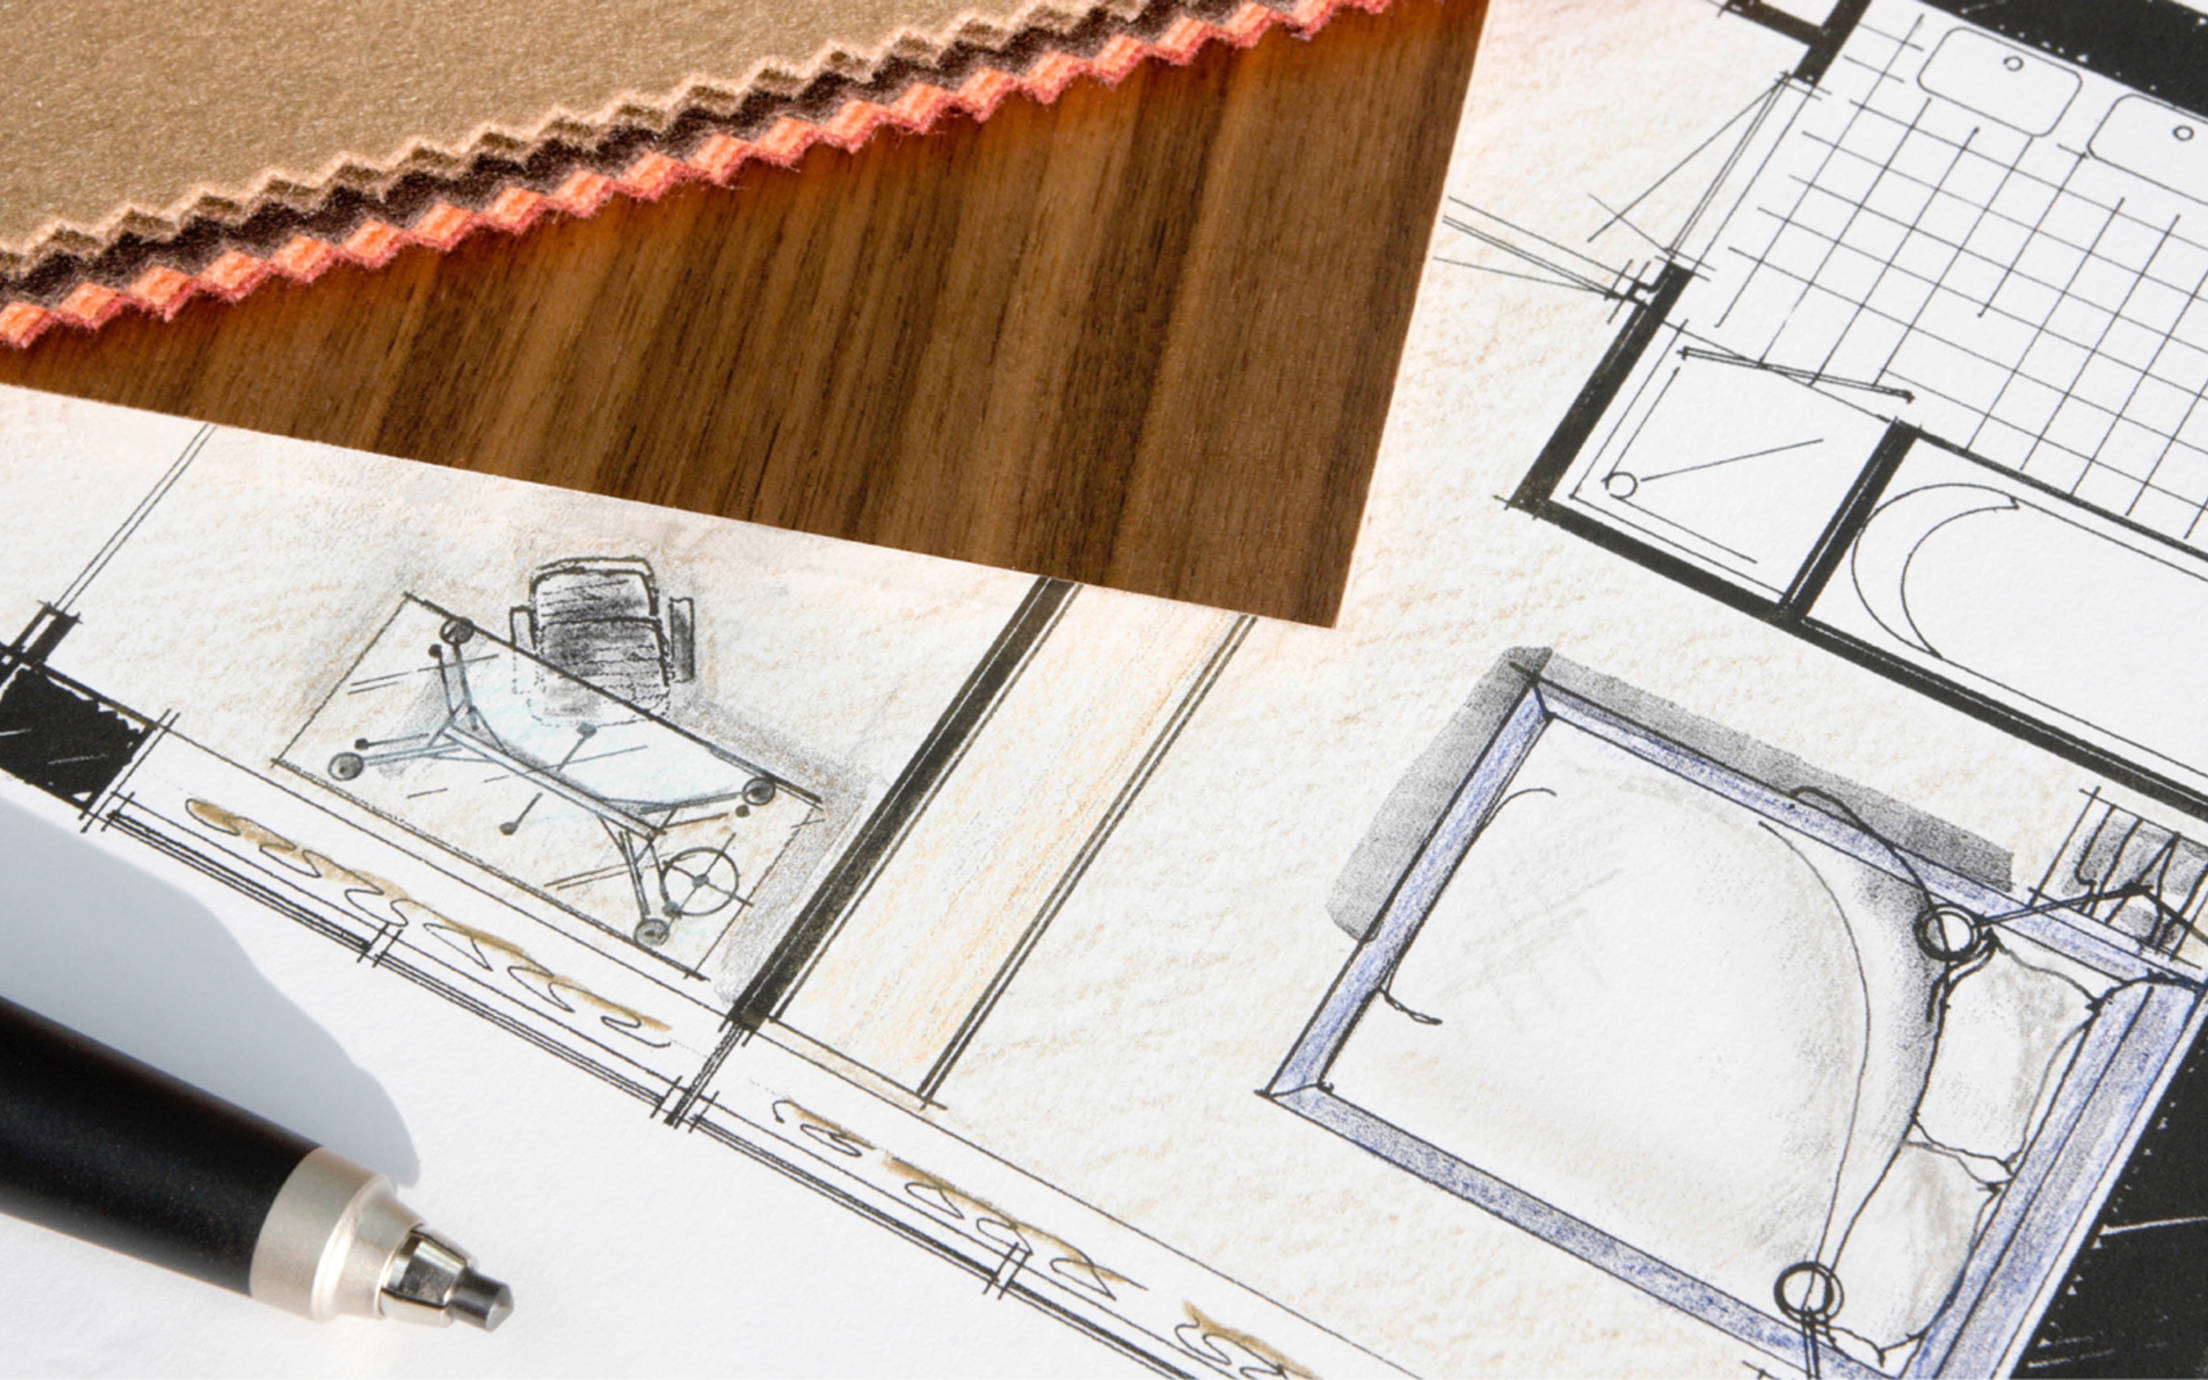 Sketches of a room on a piece of paper on a wooden table.